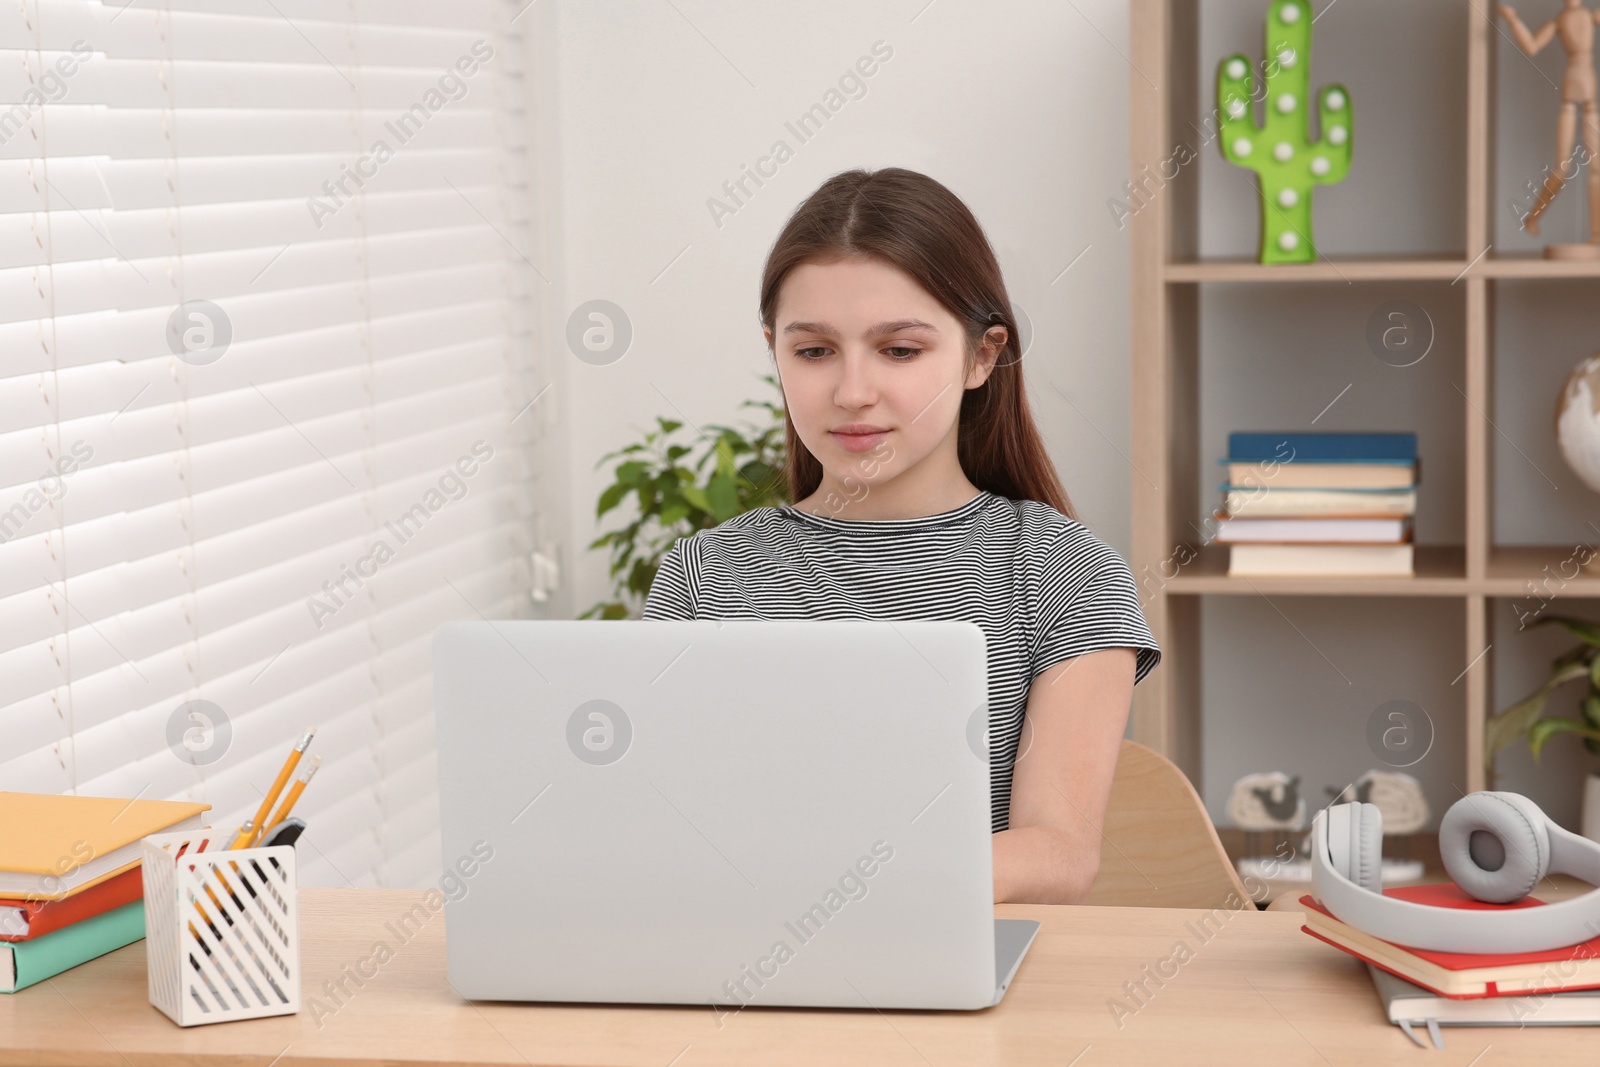 Photo of Cute girl using laptop at desk in room. Home workplace